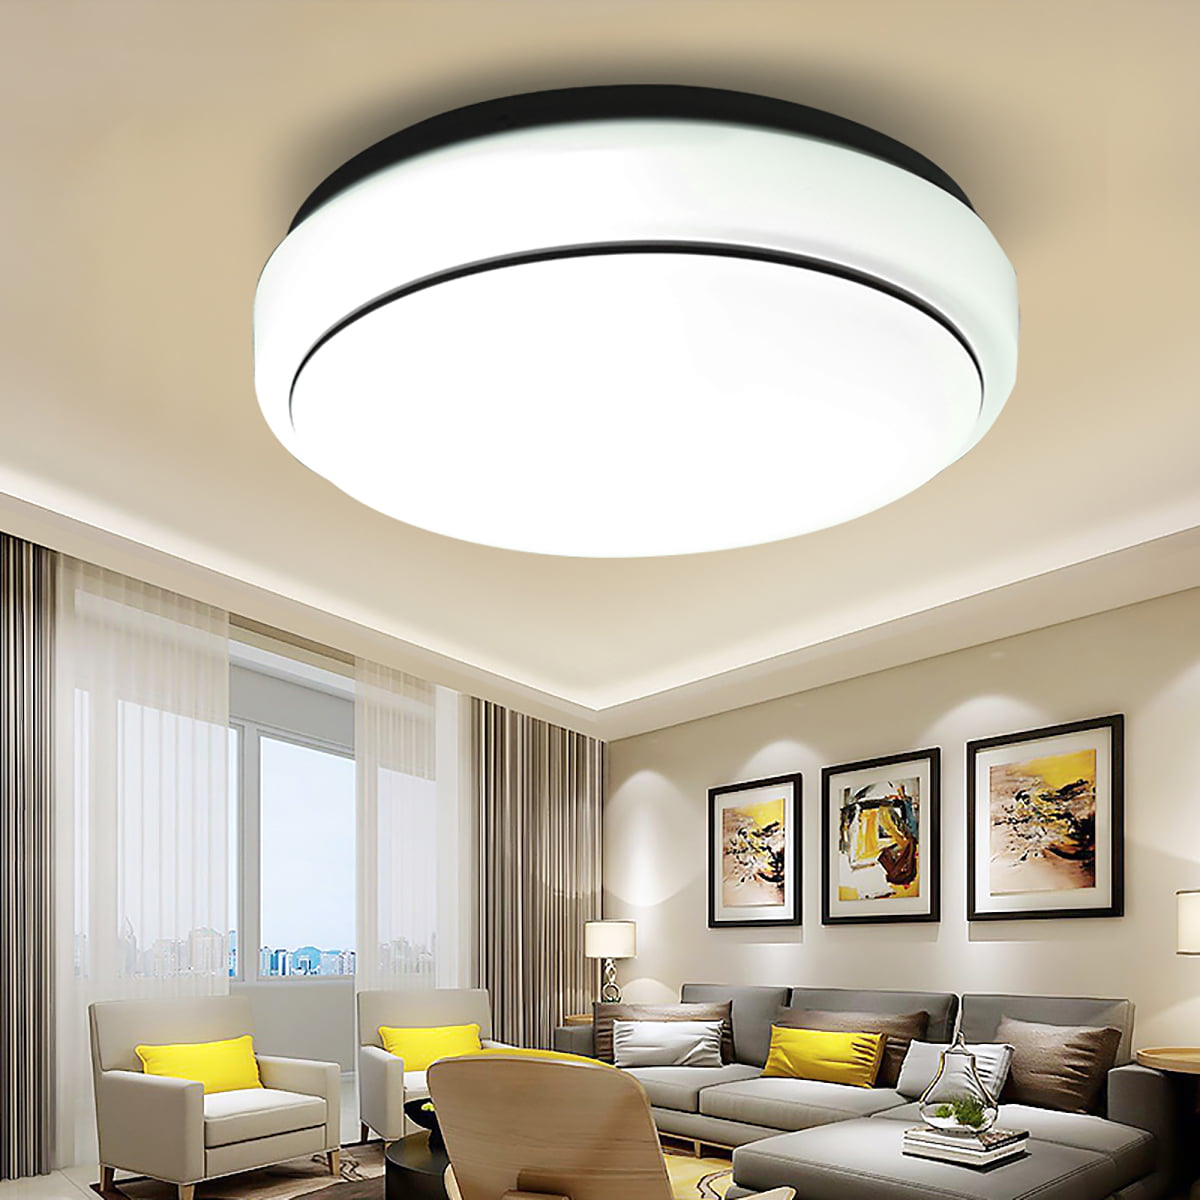 Fitting Spotlights In Ceiling